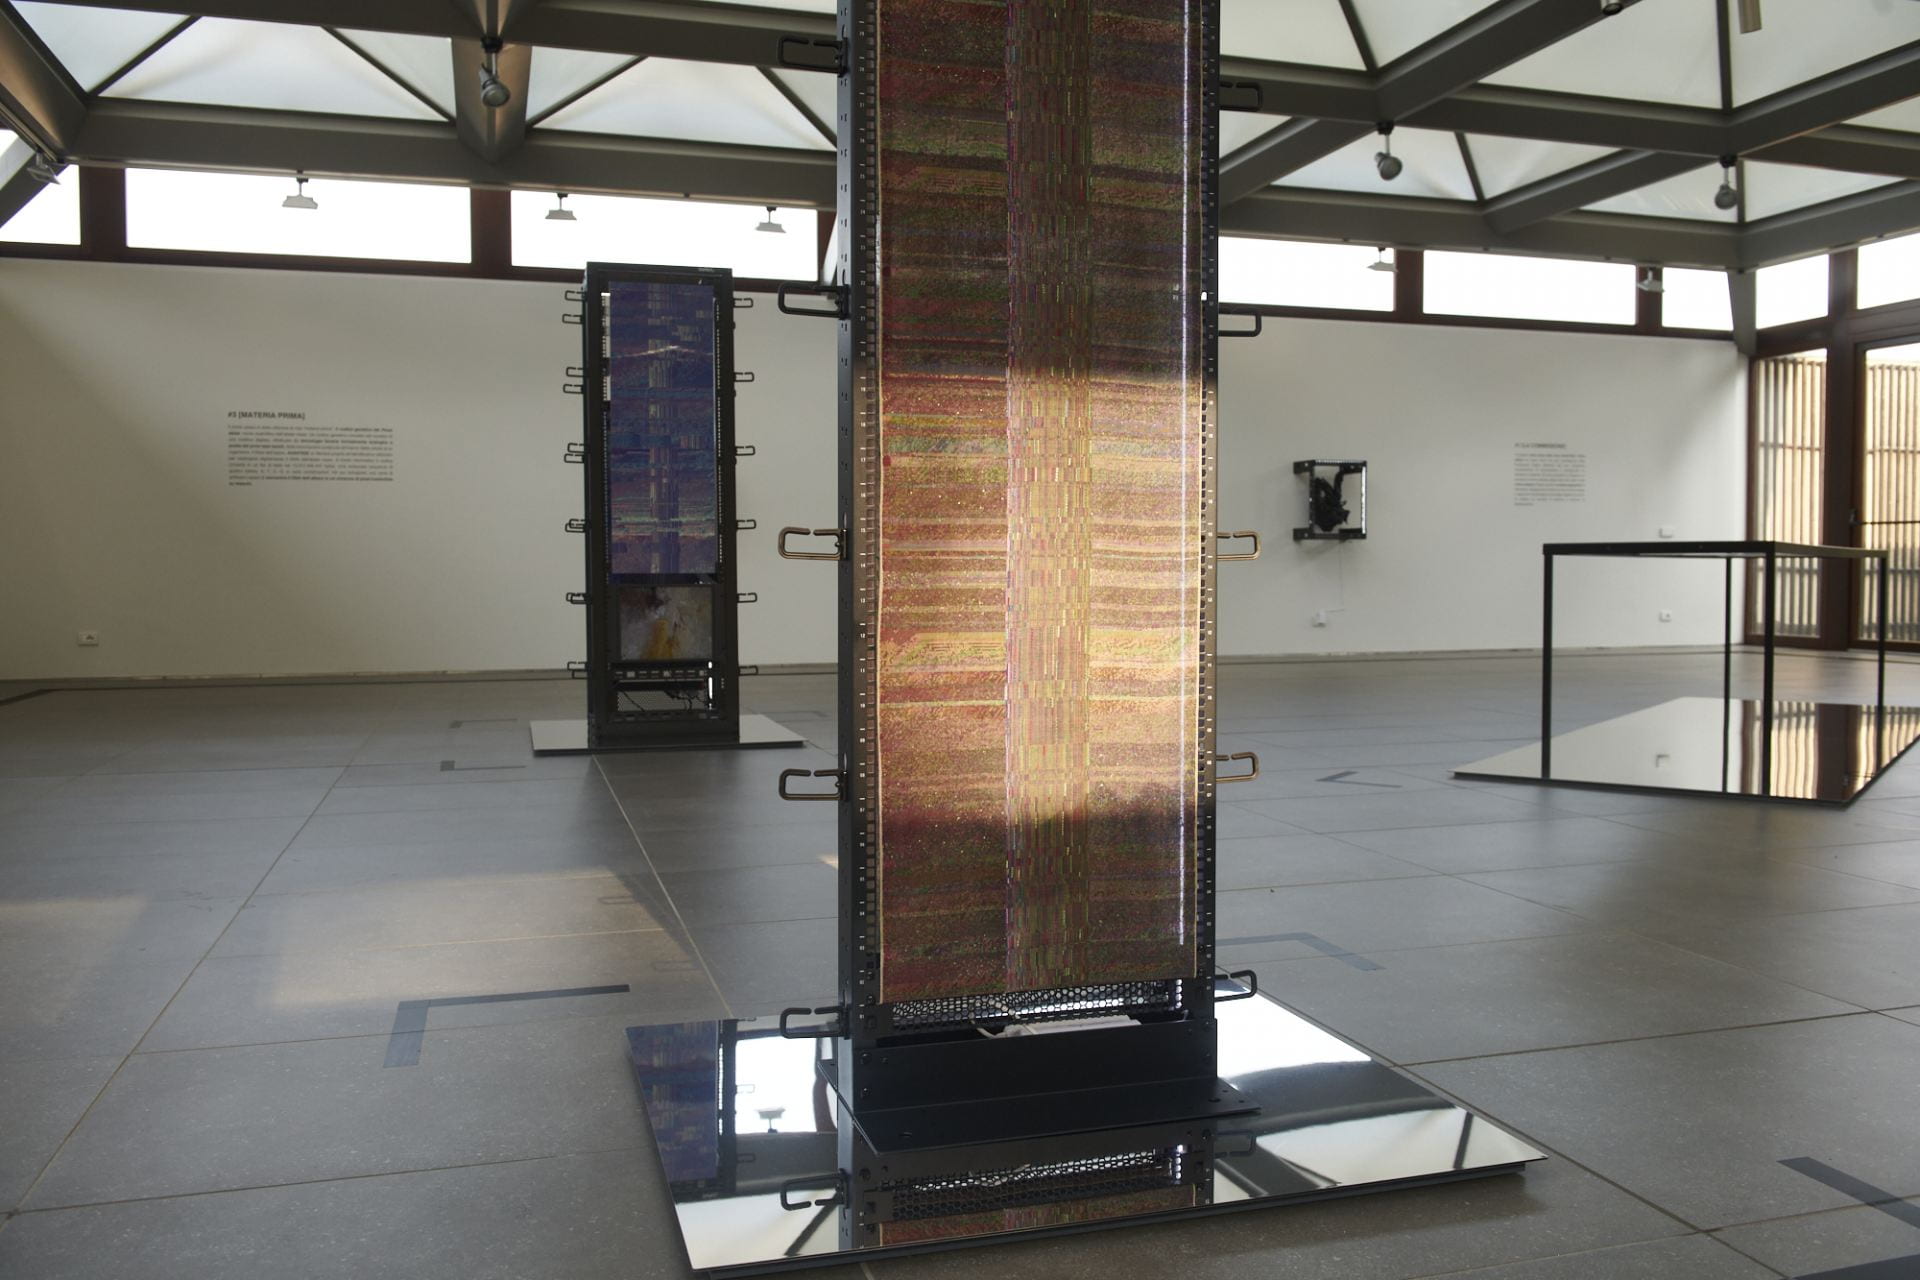 Image shows a sculptural installation with panels of woven material